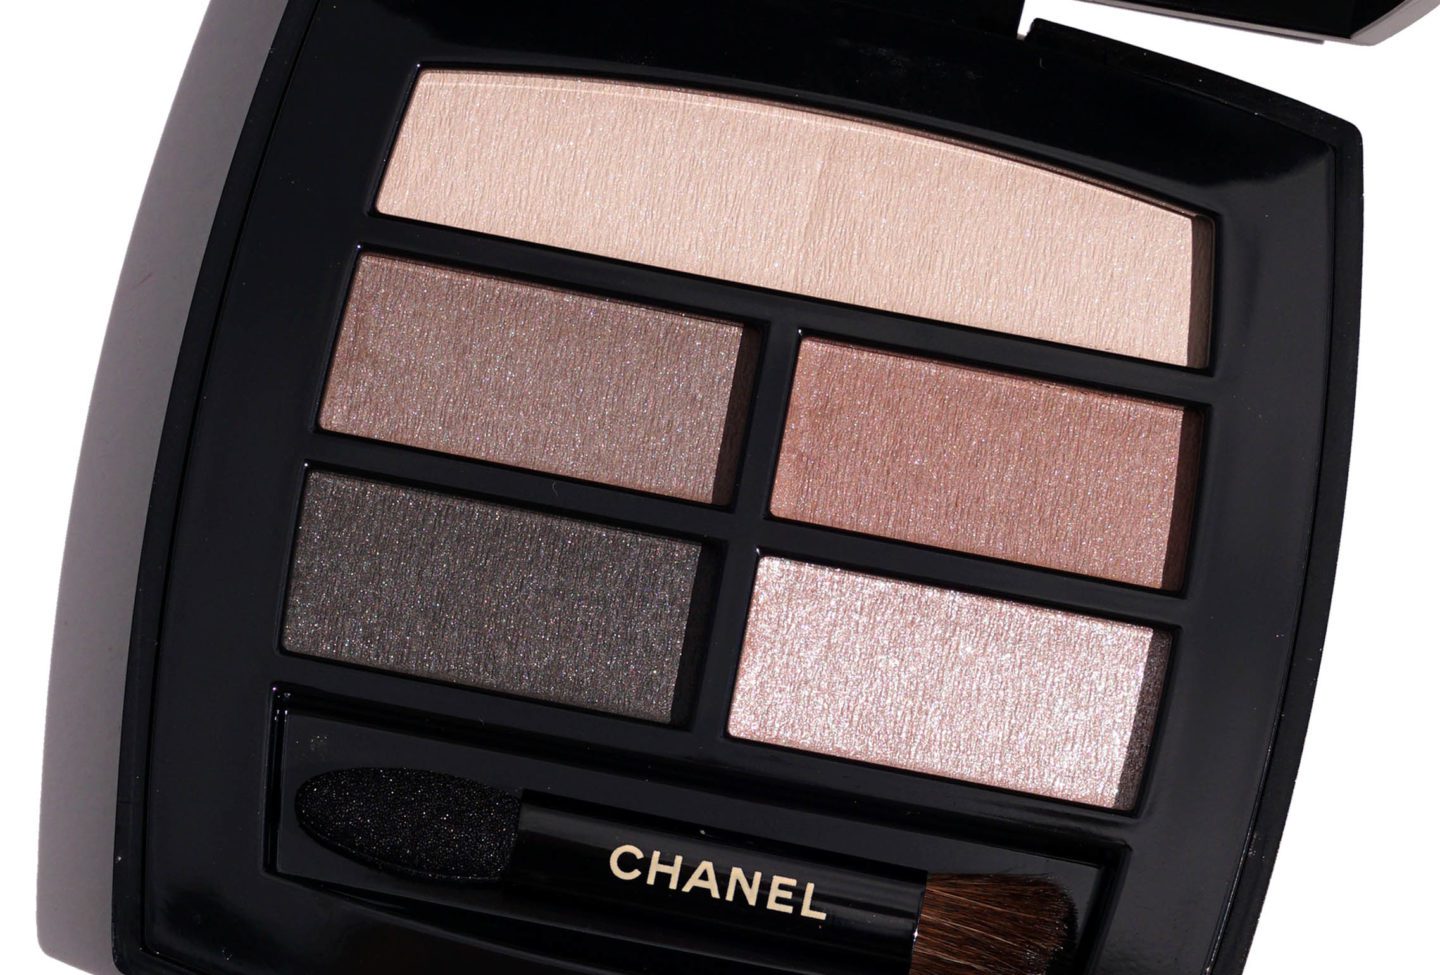 Chanel Les Beiges Healthy Glow Natural Eyeshadow Palette Review Swatches | The Beauty Look Book